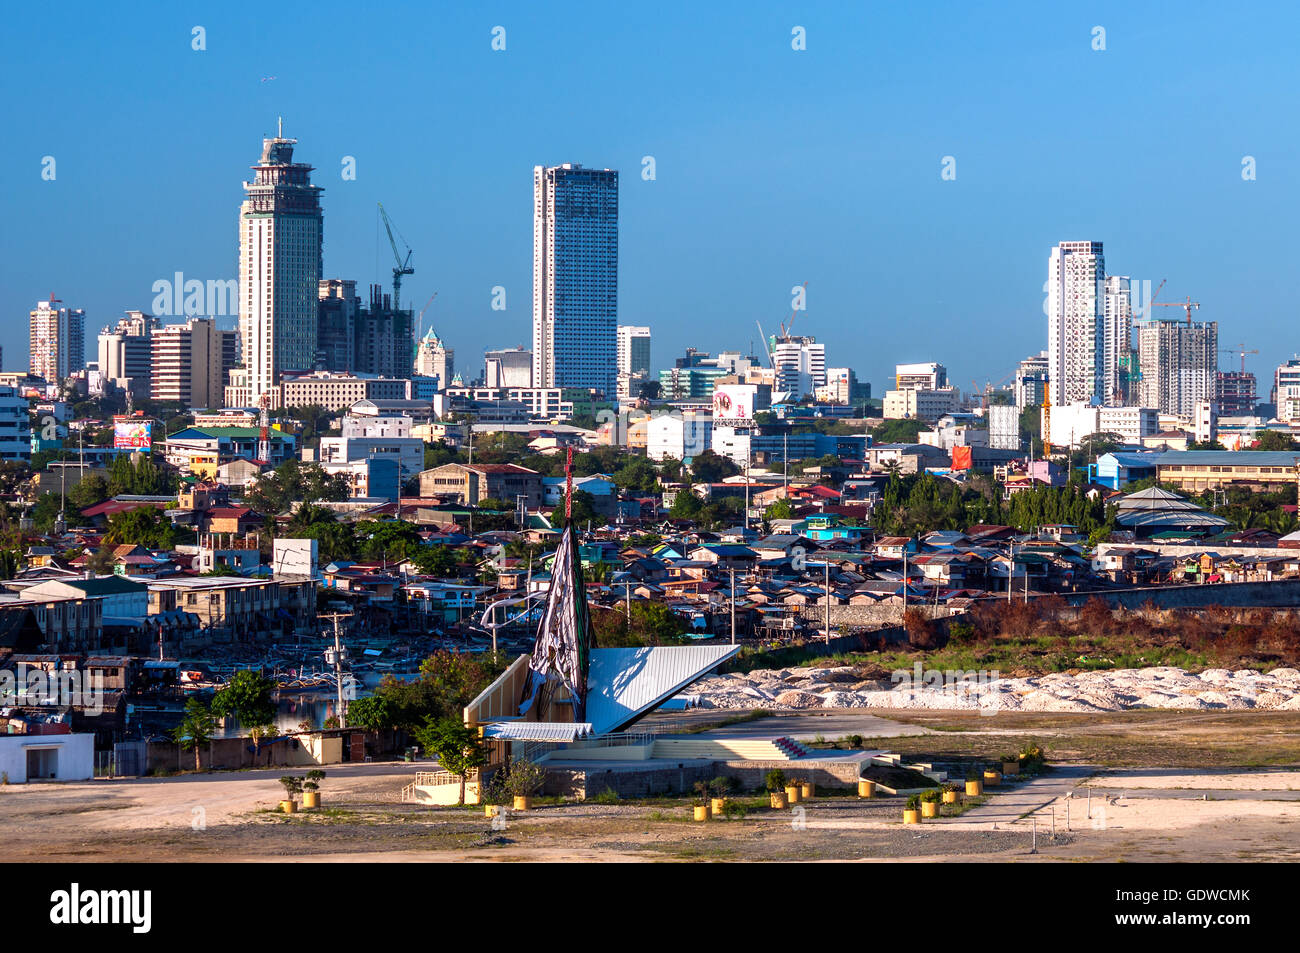 Aerial view of City skyline with low cost housing in foreground, seen from southwest, South Road Precinct, Cebu City, Philippine Stock Photo